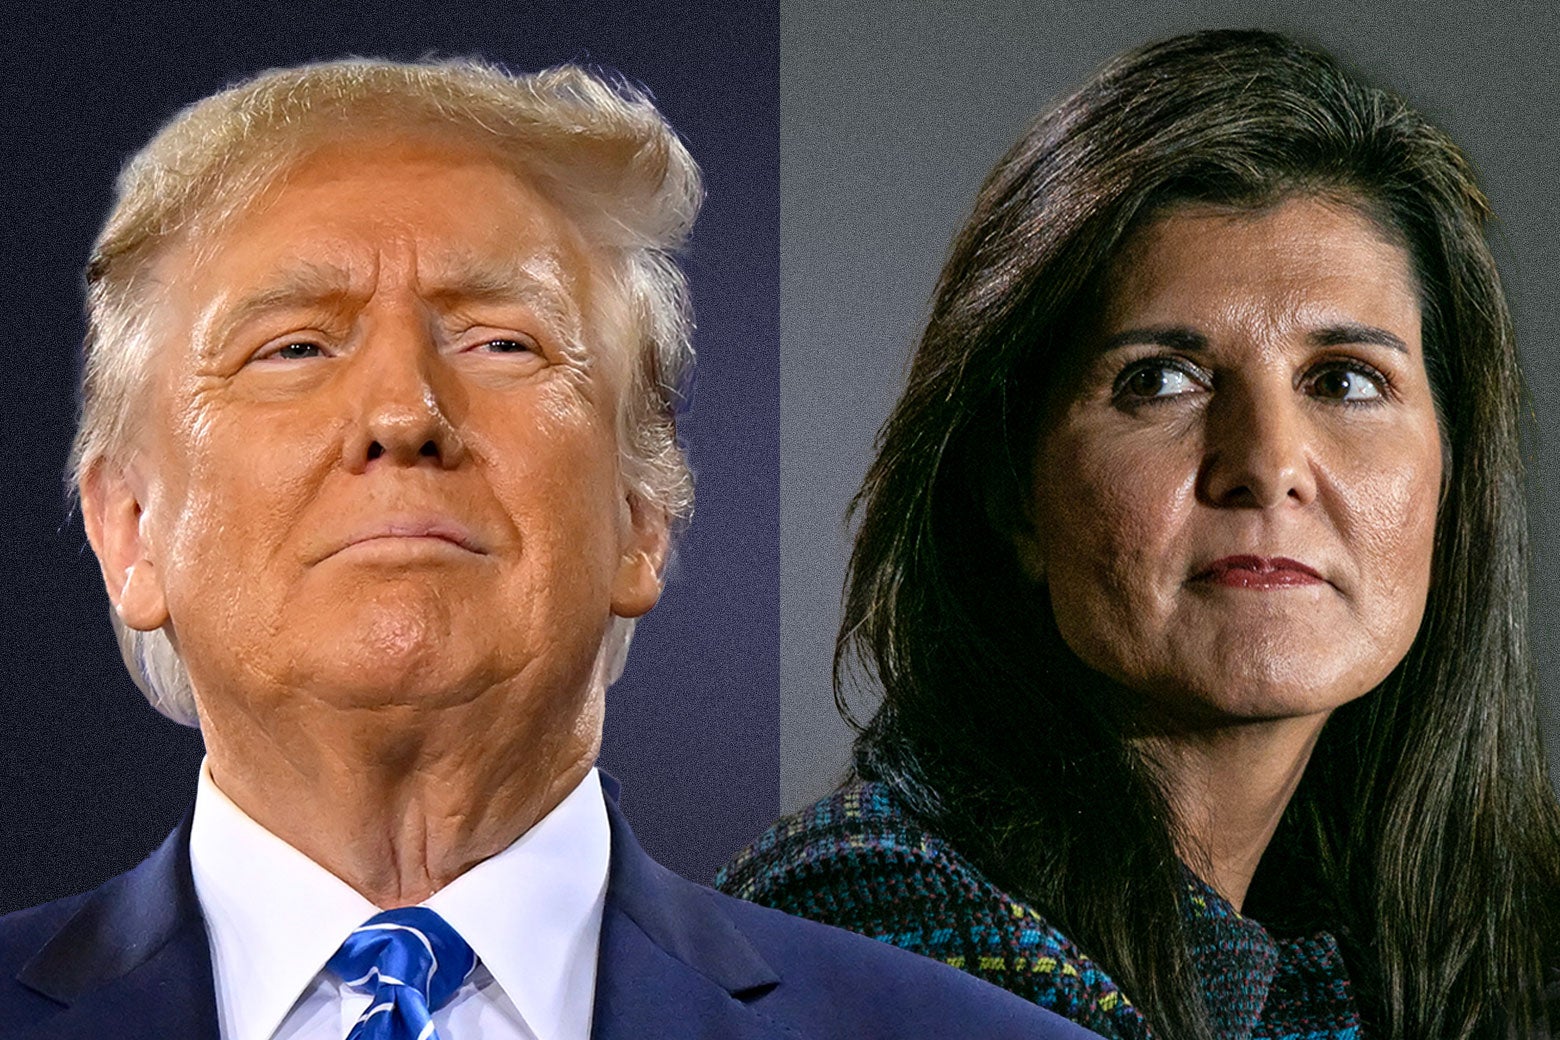 A diptych with Donald Trump on the left side and Nikki Haley on the right side.